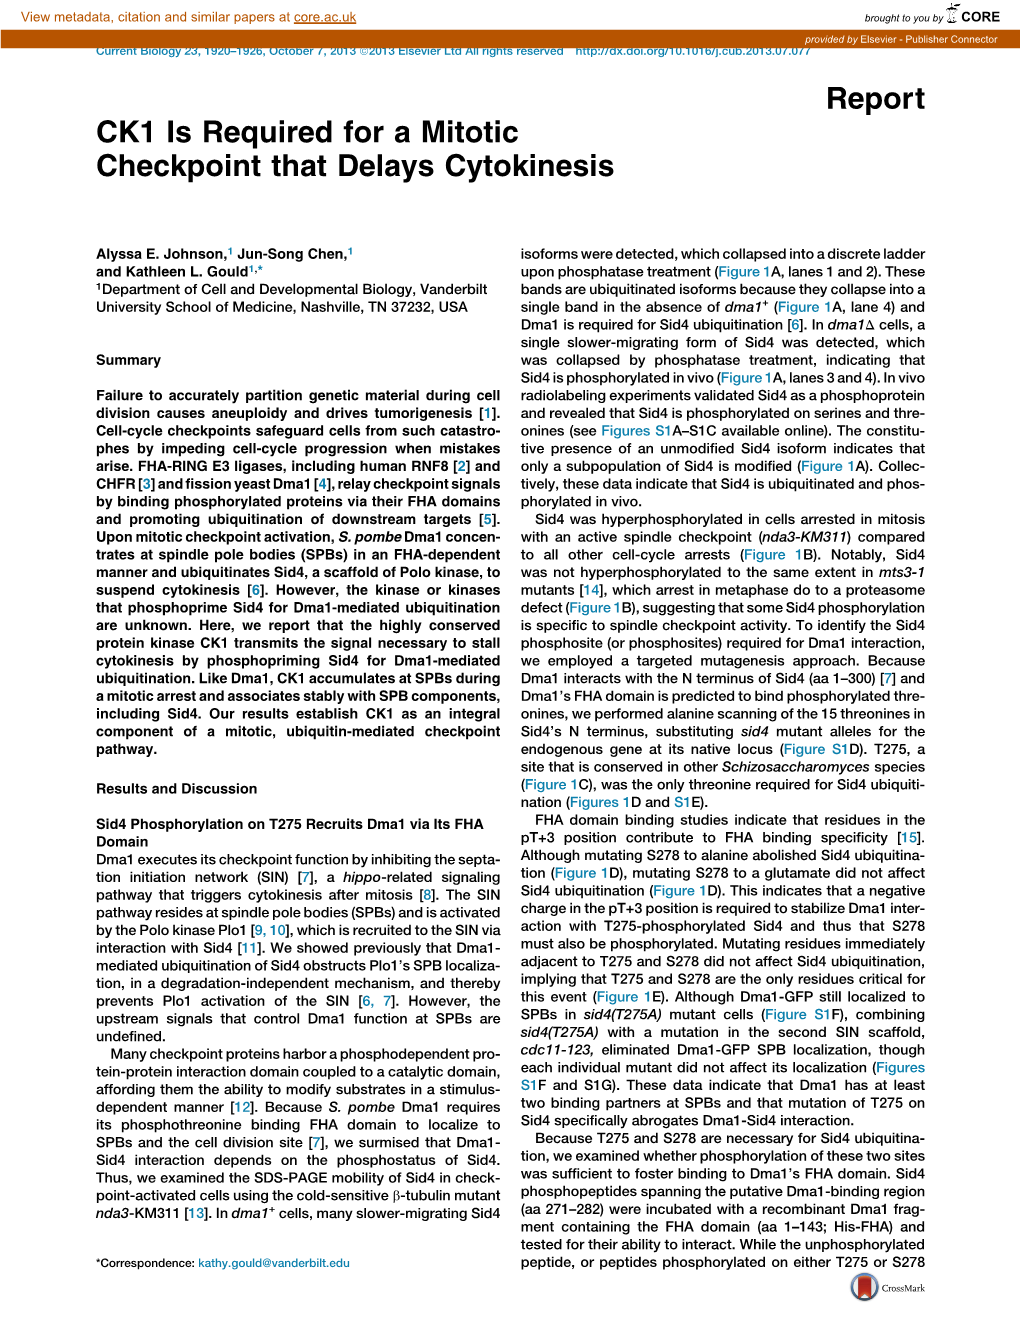 CK1 Is Required for a Mitotic Checkpoint That Delays Cytokinesis